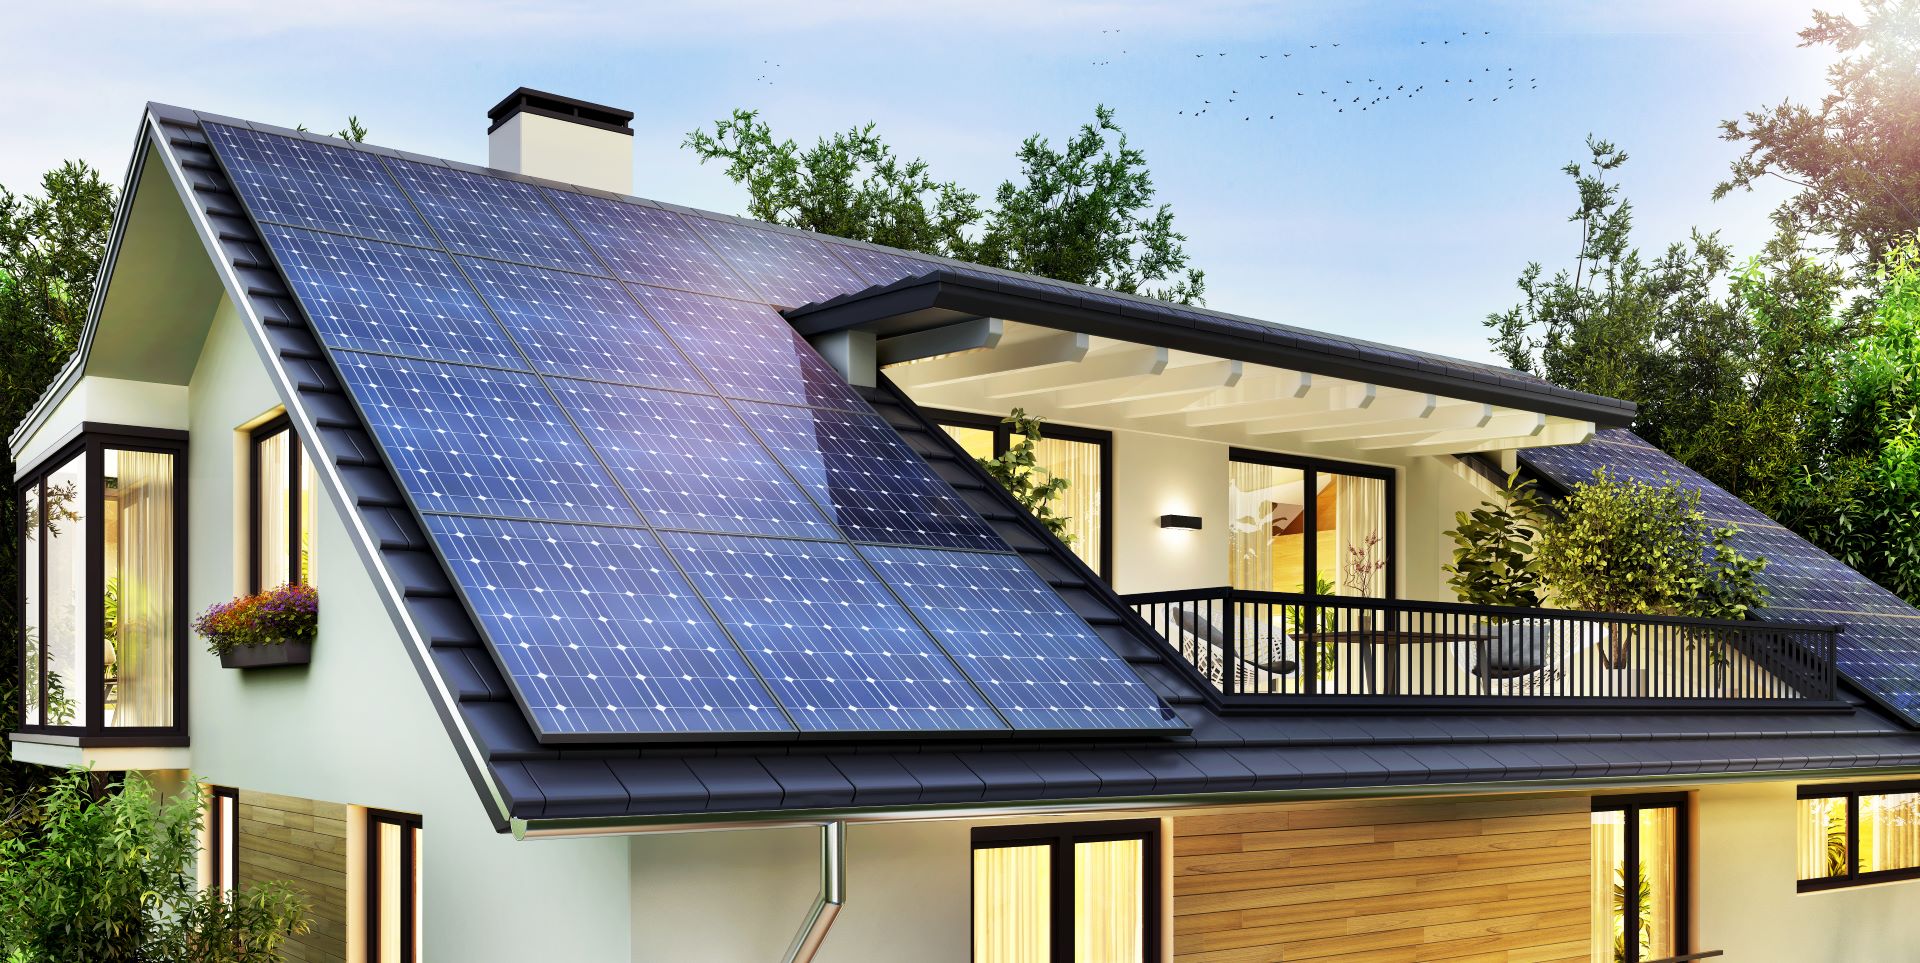 A house with solar panels on the roof, ultimate guide to solar panels.